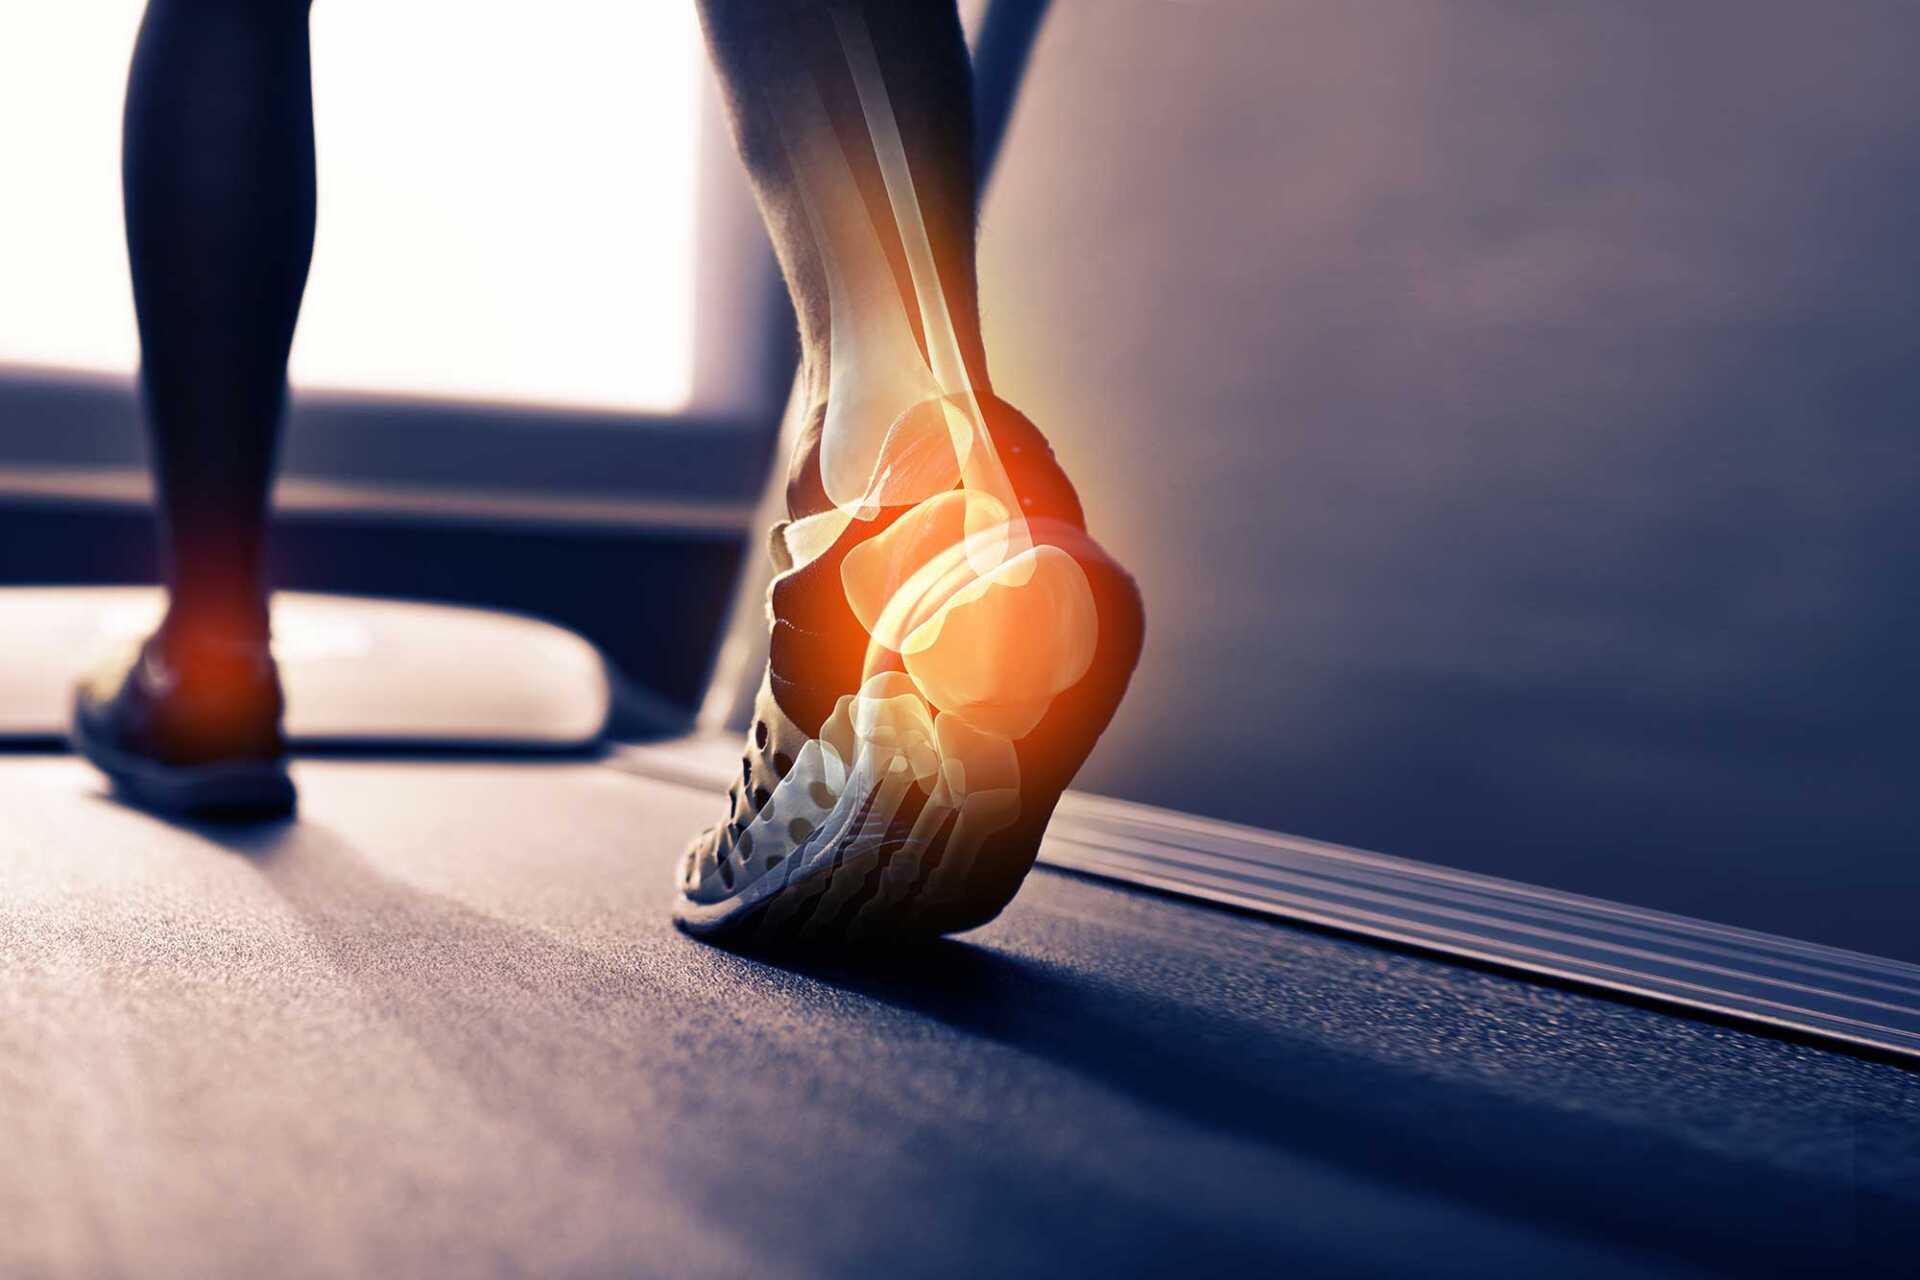 View of a trainer walking on a treadmill showing the bone structure of a foot